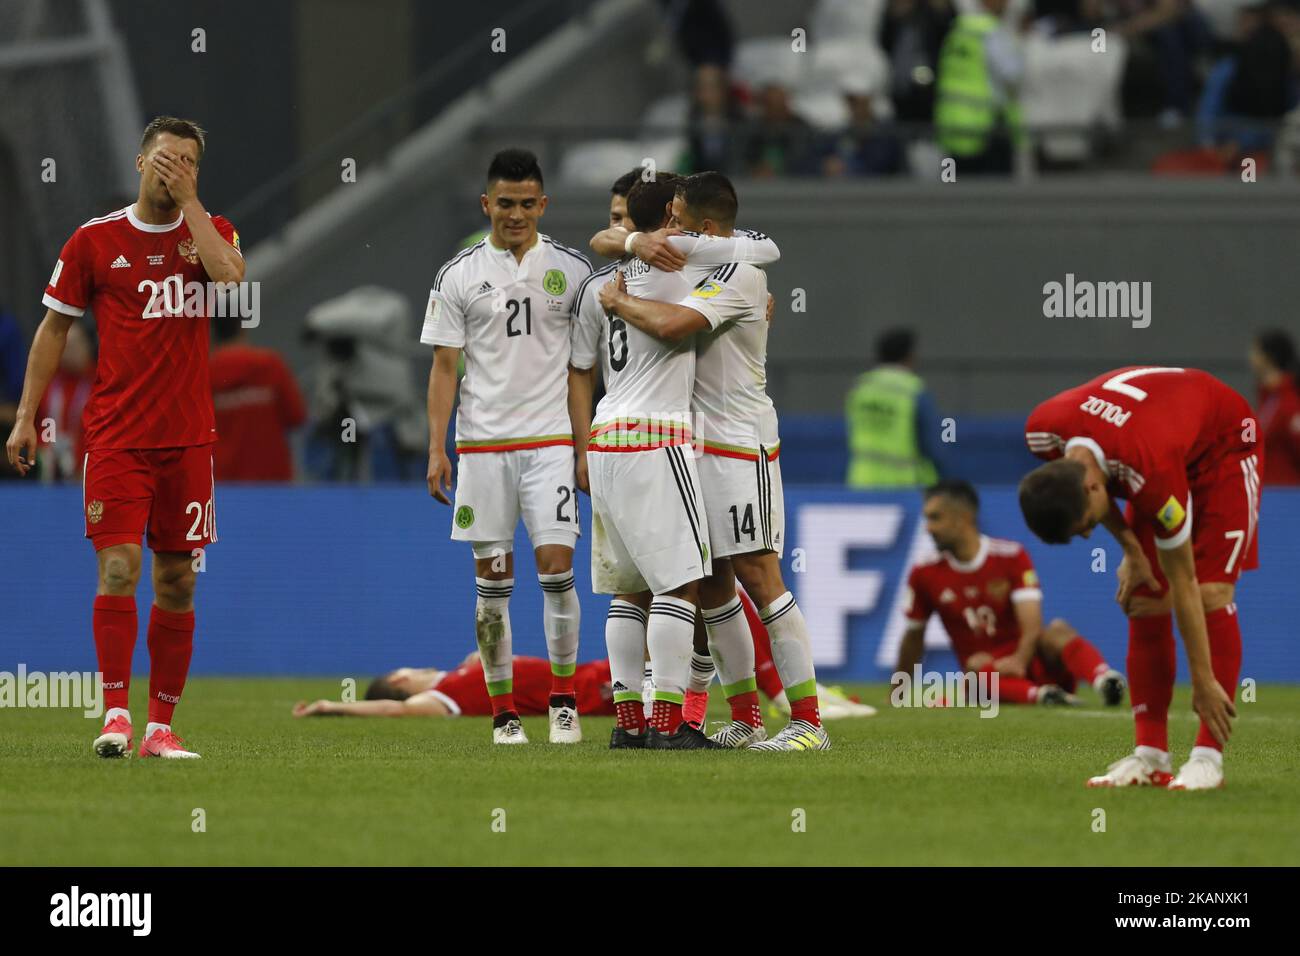 Russia national team players Maksim Kanunnikov (L), Alexander Samedov (2nd R) and Dmitry Poloz (R) react as Mexico national team players Luis Reyes (N21), Javier Hernandez (N14) and Jonathan Dos Santos celebrate victory during the Group A - FIFA Confederations Cup Russia 2017 match between Russia and Mexico at Kazan Arena on June 24, 2017 in Kazan, Russia. (Photo by Mike Kireev/NurPhoto) *** Please Use Credit from Credit Field *** Stock Photo